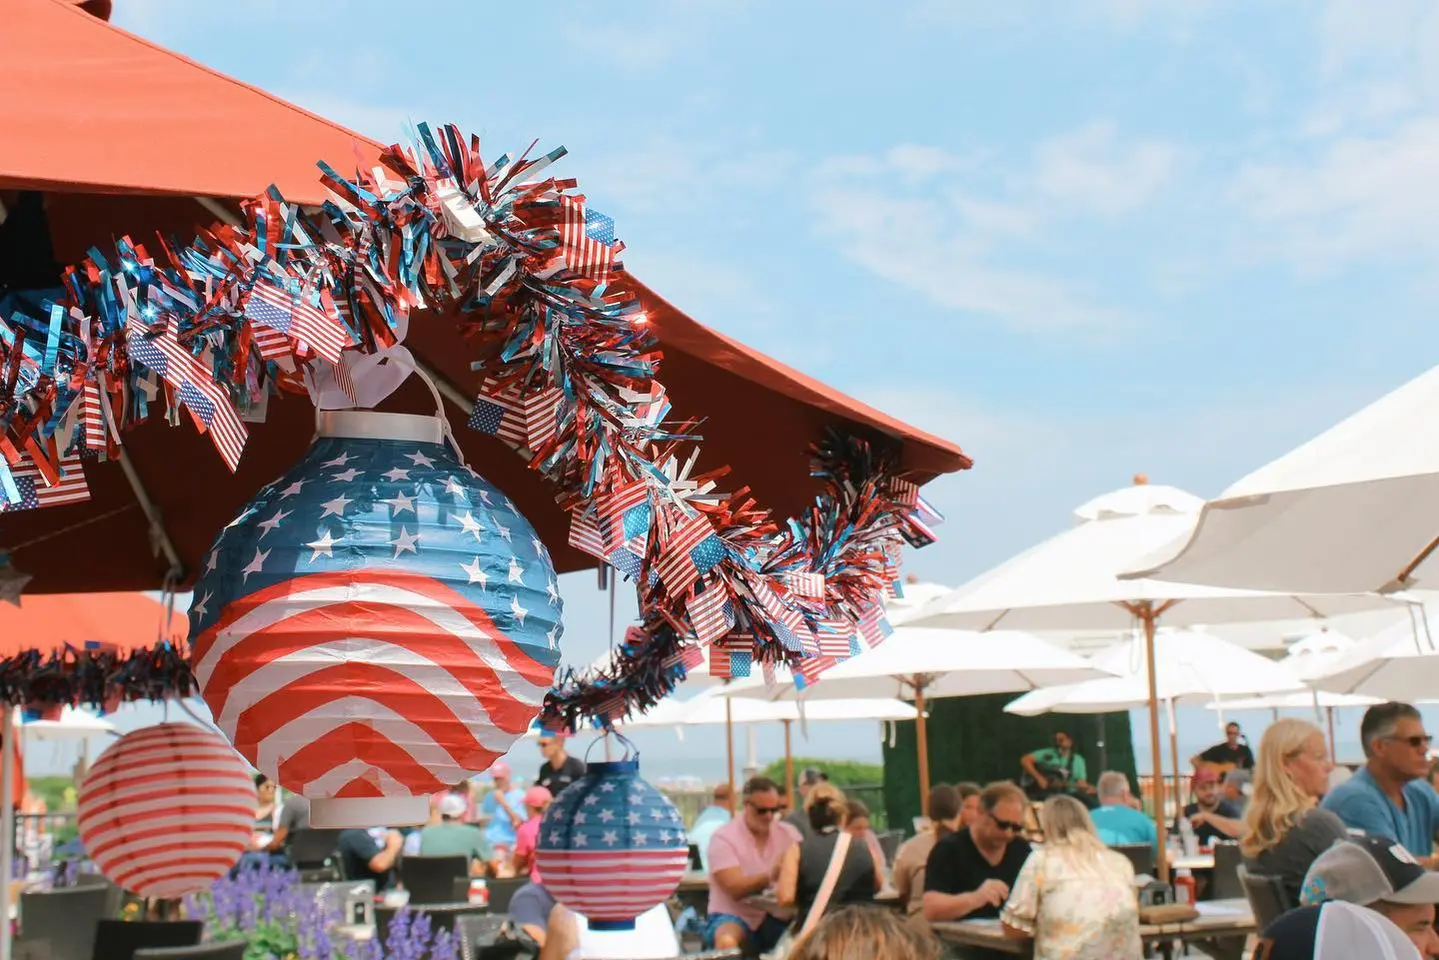 What to do in Cape May this 4th Of July